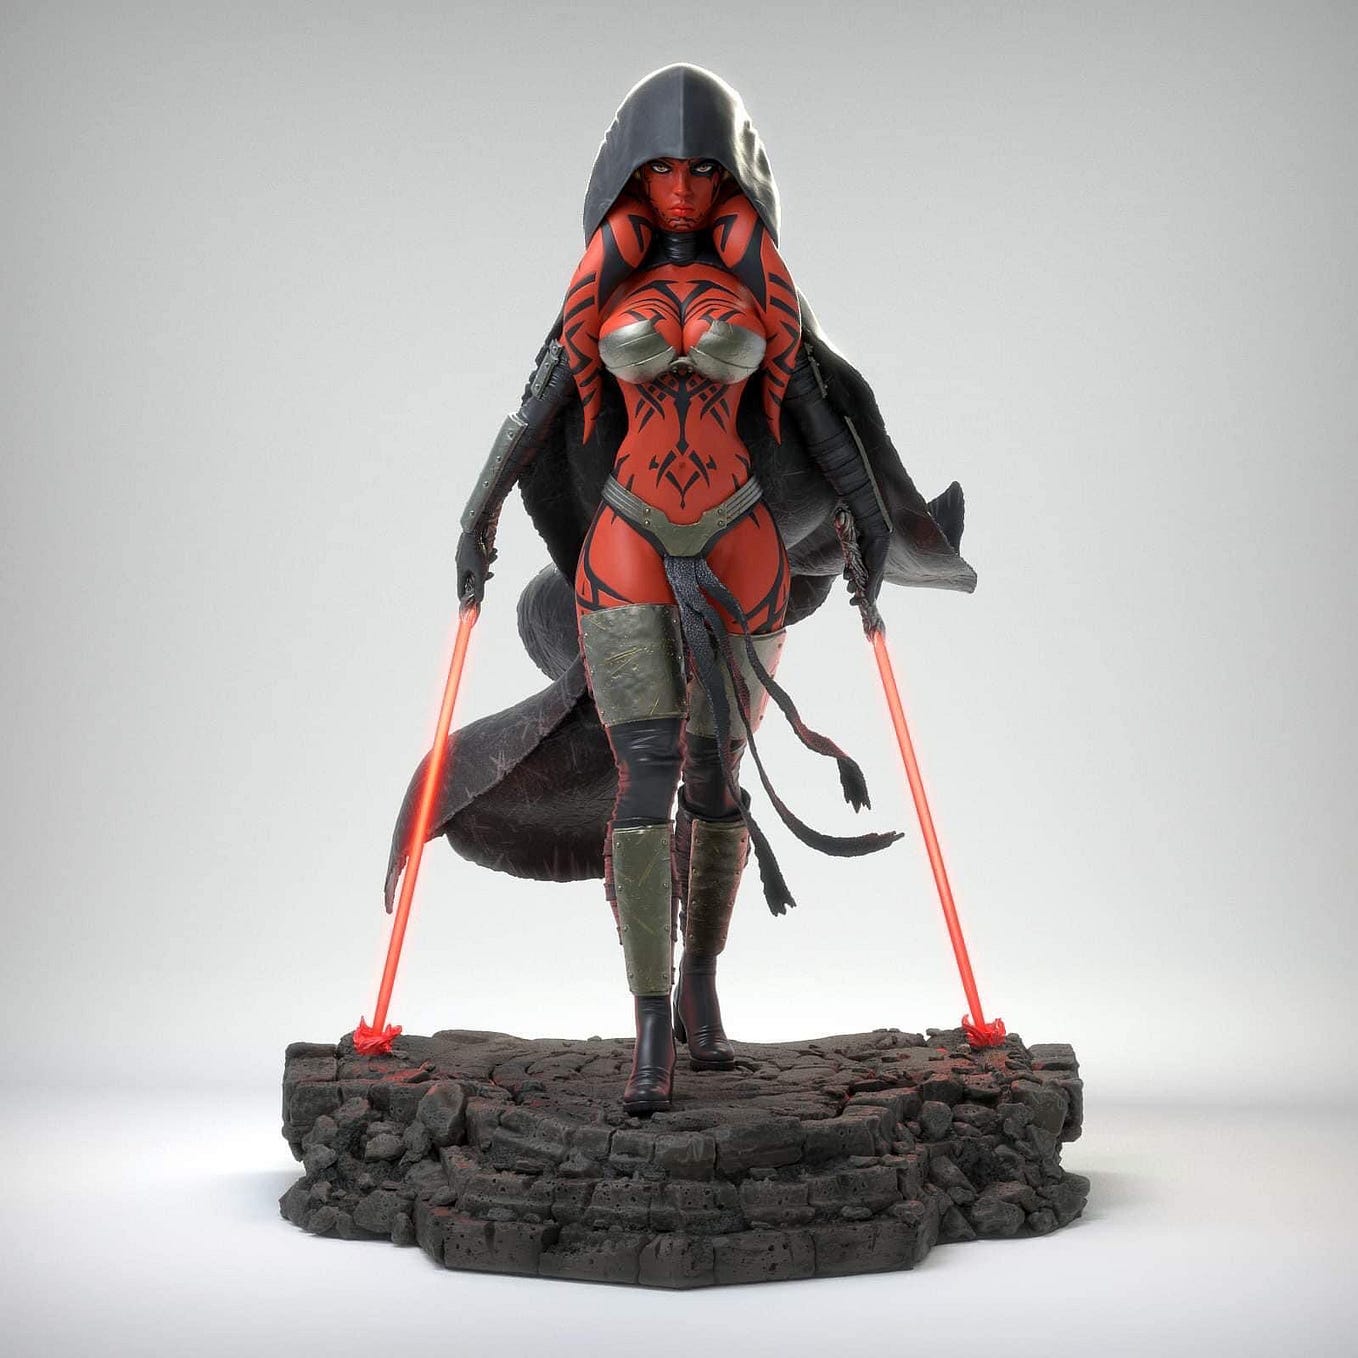 BUG TYPE Resin PC House Studio Model Collectibles Statue 35cm